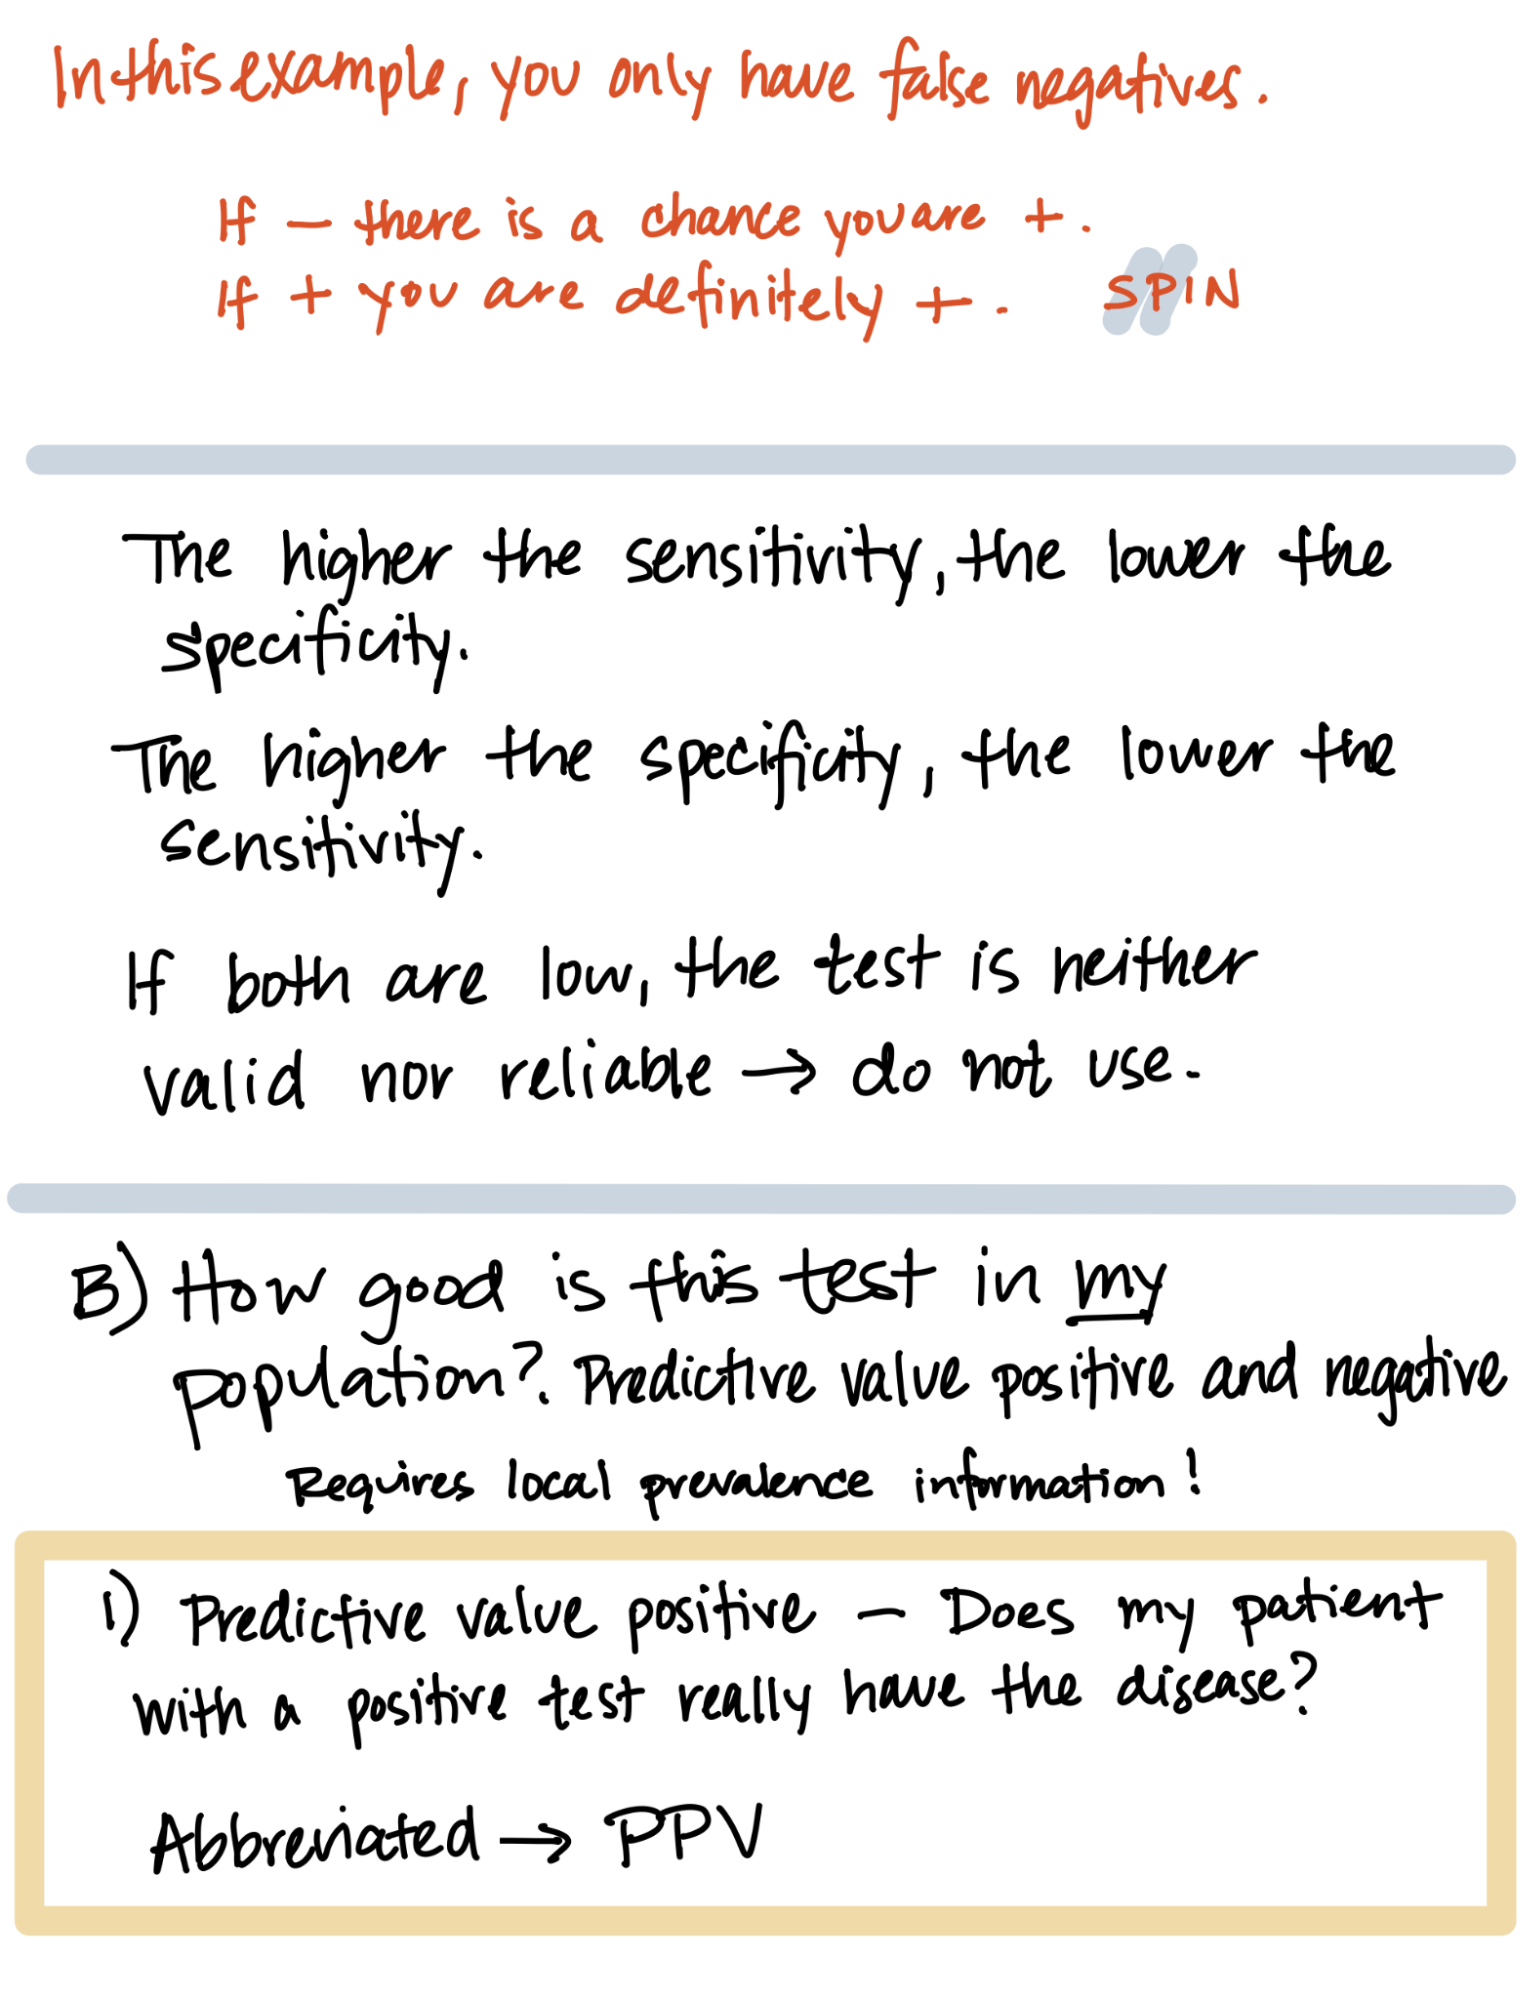 In this example, you only have false negatives. If negative, there is a chance you are positive. If positive, you are definitely positive (remember: Spin). The higher the sensitivity, the lower the specificity. The higher the specificity, the lower the sensitivity. If both are low, the test is neither valid nor reliable, so do not use. B) How good is this test in my population? Predictive value positive and negative. Requires local prevalence information! 1) Predictive value positive (PPV): Does my patient with a positive test really have the disease?